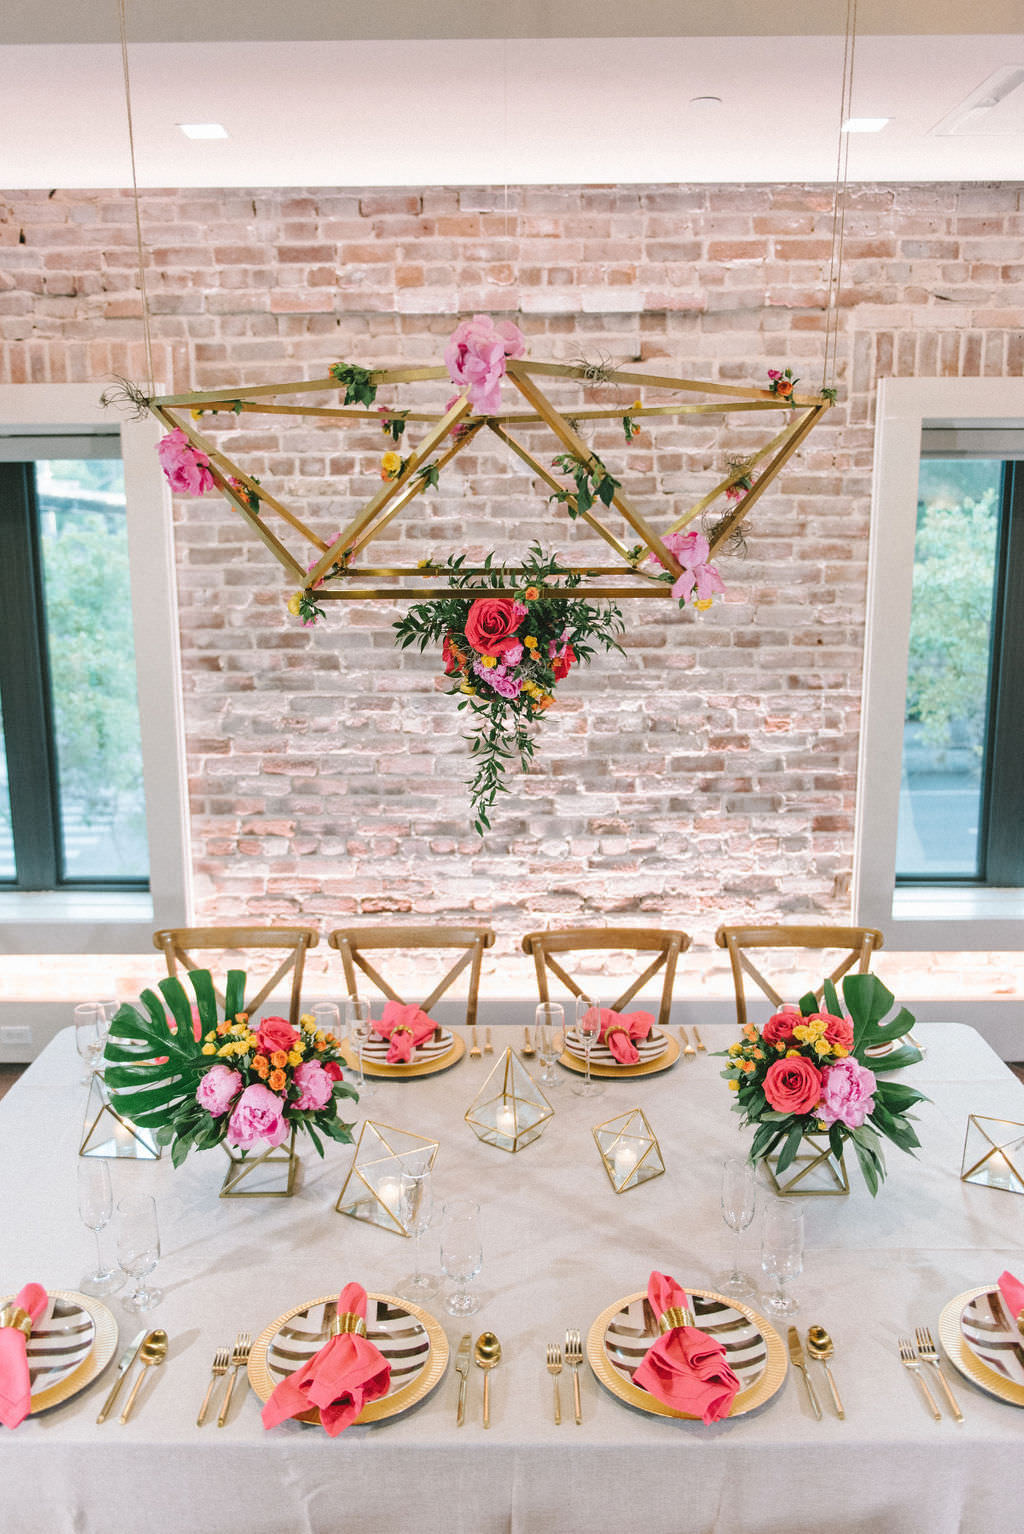 Modern Colorful Tropical Wedding Reception Decor, Feasting Table with Sheer White Linen, Wooden Crossback Chairs, Pink and Yellow Flowers and Green Monstera Palm Leaf Centerpieces, Hanging Gold Geometric Chandelier with Orange, Pink and Greenery Floral Arrangement, Gold Chargers and Plates with Bright Pink Linen with Gold Napkin Ring | Tampa Bay Wedding Photographer Kera Photography | Downtown St. Pete Modern Wedding Venue Red Mesa Events | Wedding Florist and Rentals Gabro Event Services | Wedding Linen and Tabletop Rentals Kate Ryan Event Rentals | Wedding Planner UNIQUE Weddings & Events